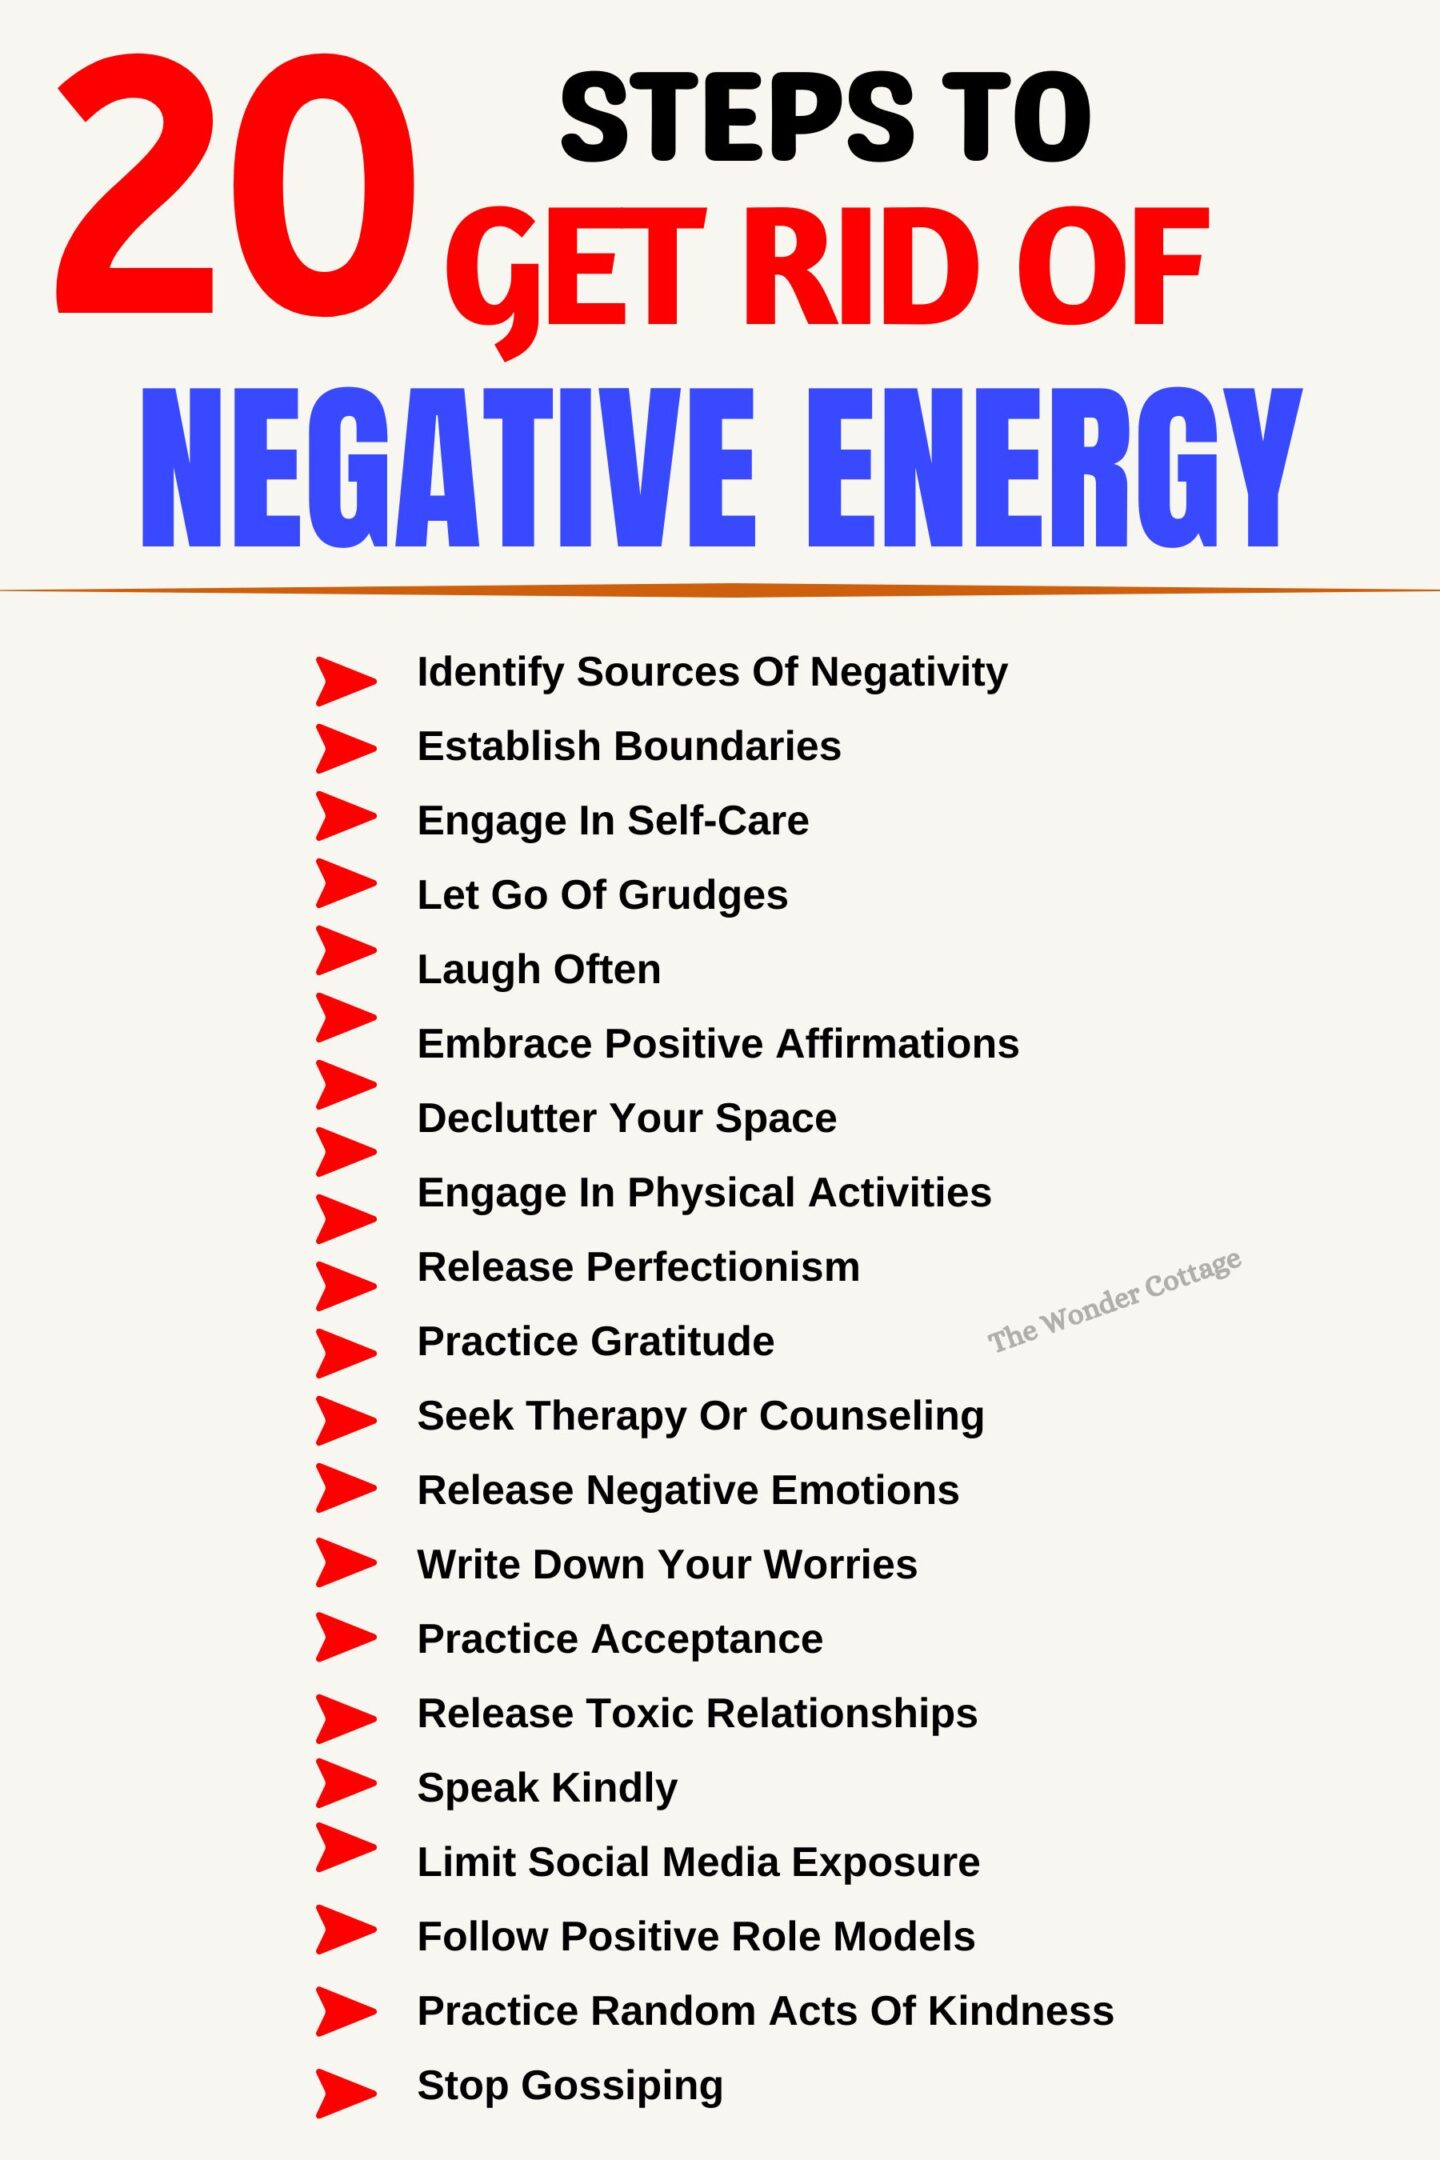 20 Steps To Get Rid Of Negative Energy